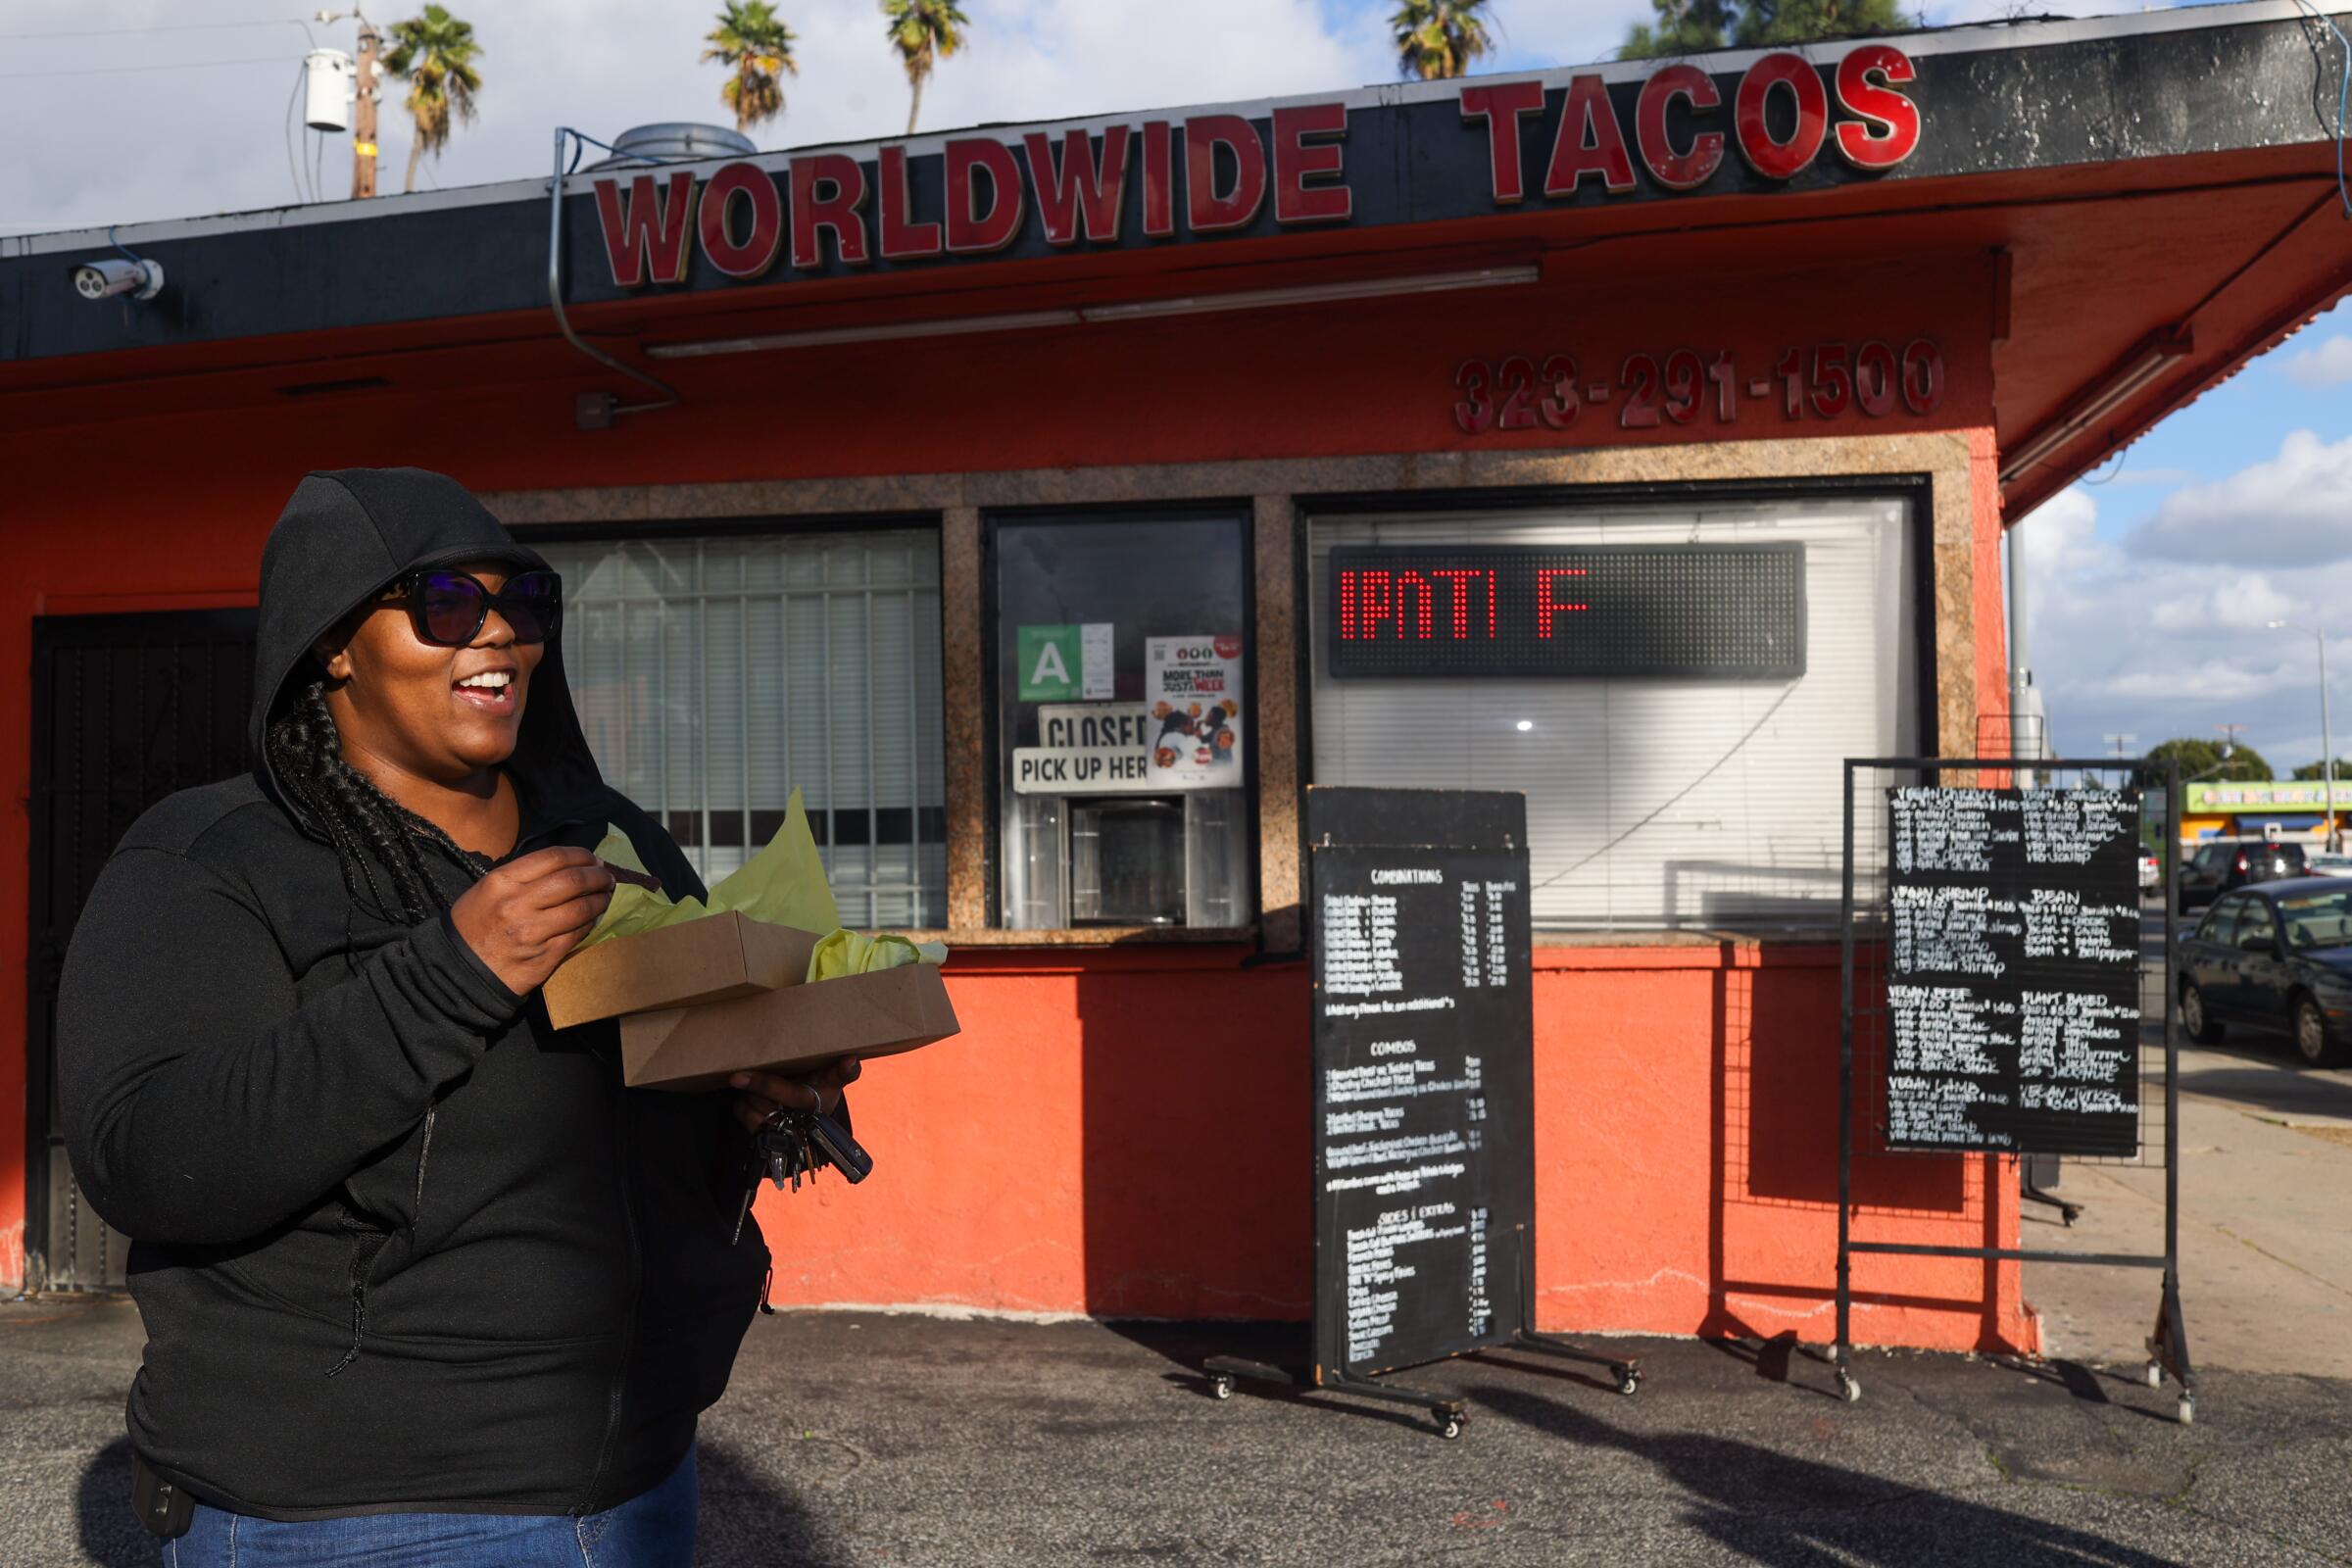 Jennifer Brown grins after receiving her tacos and burrito at Worldwide Tacos.